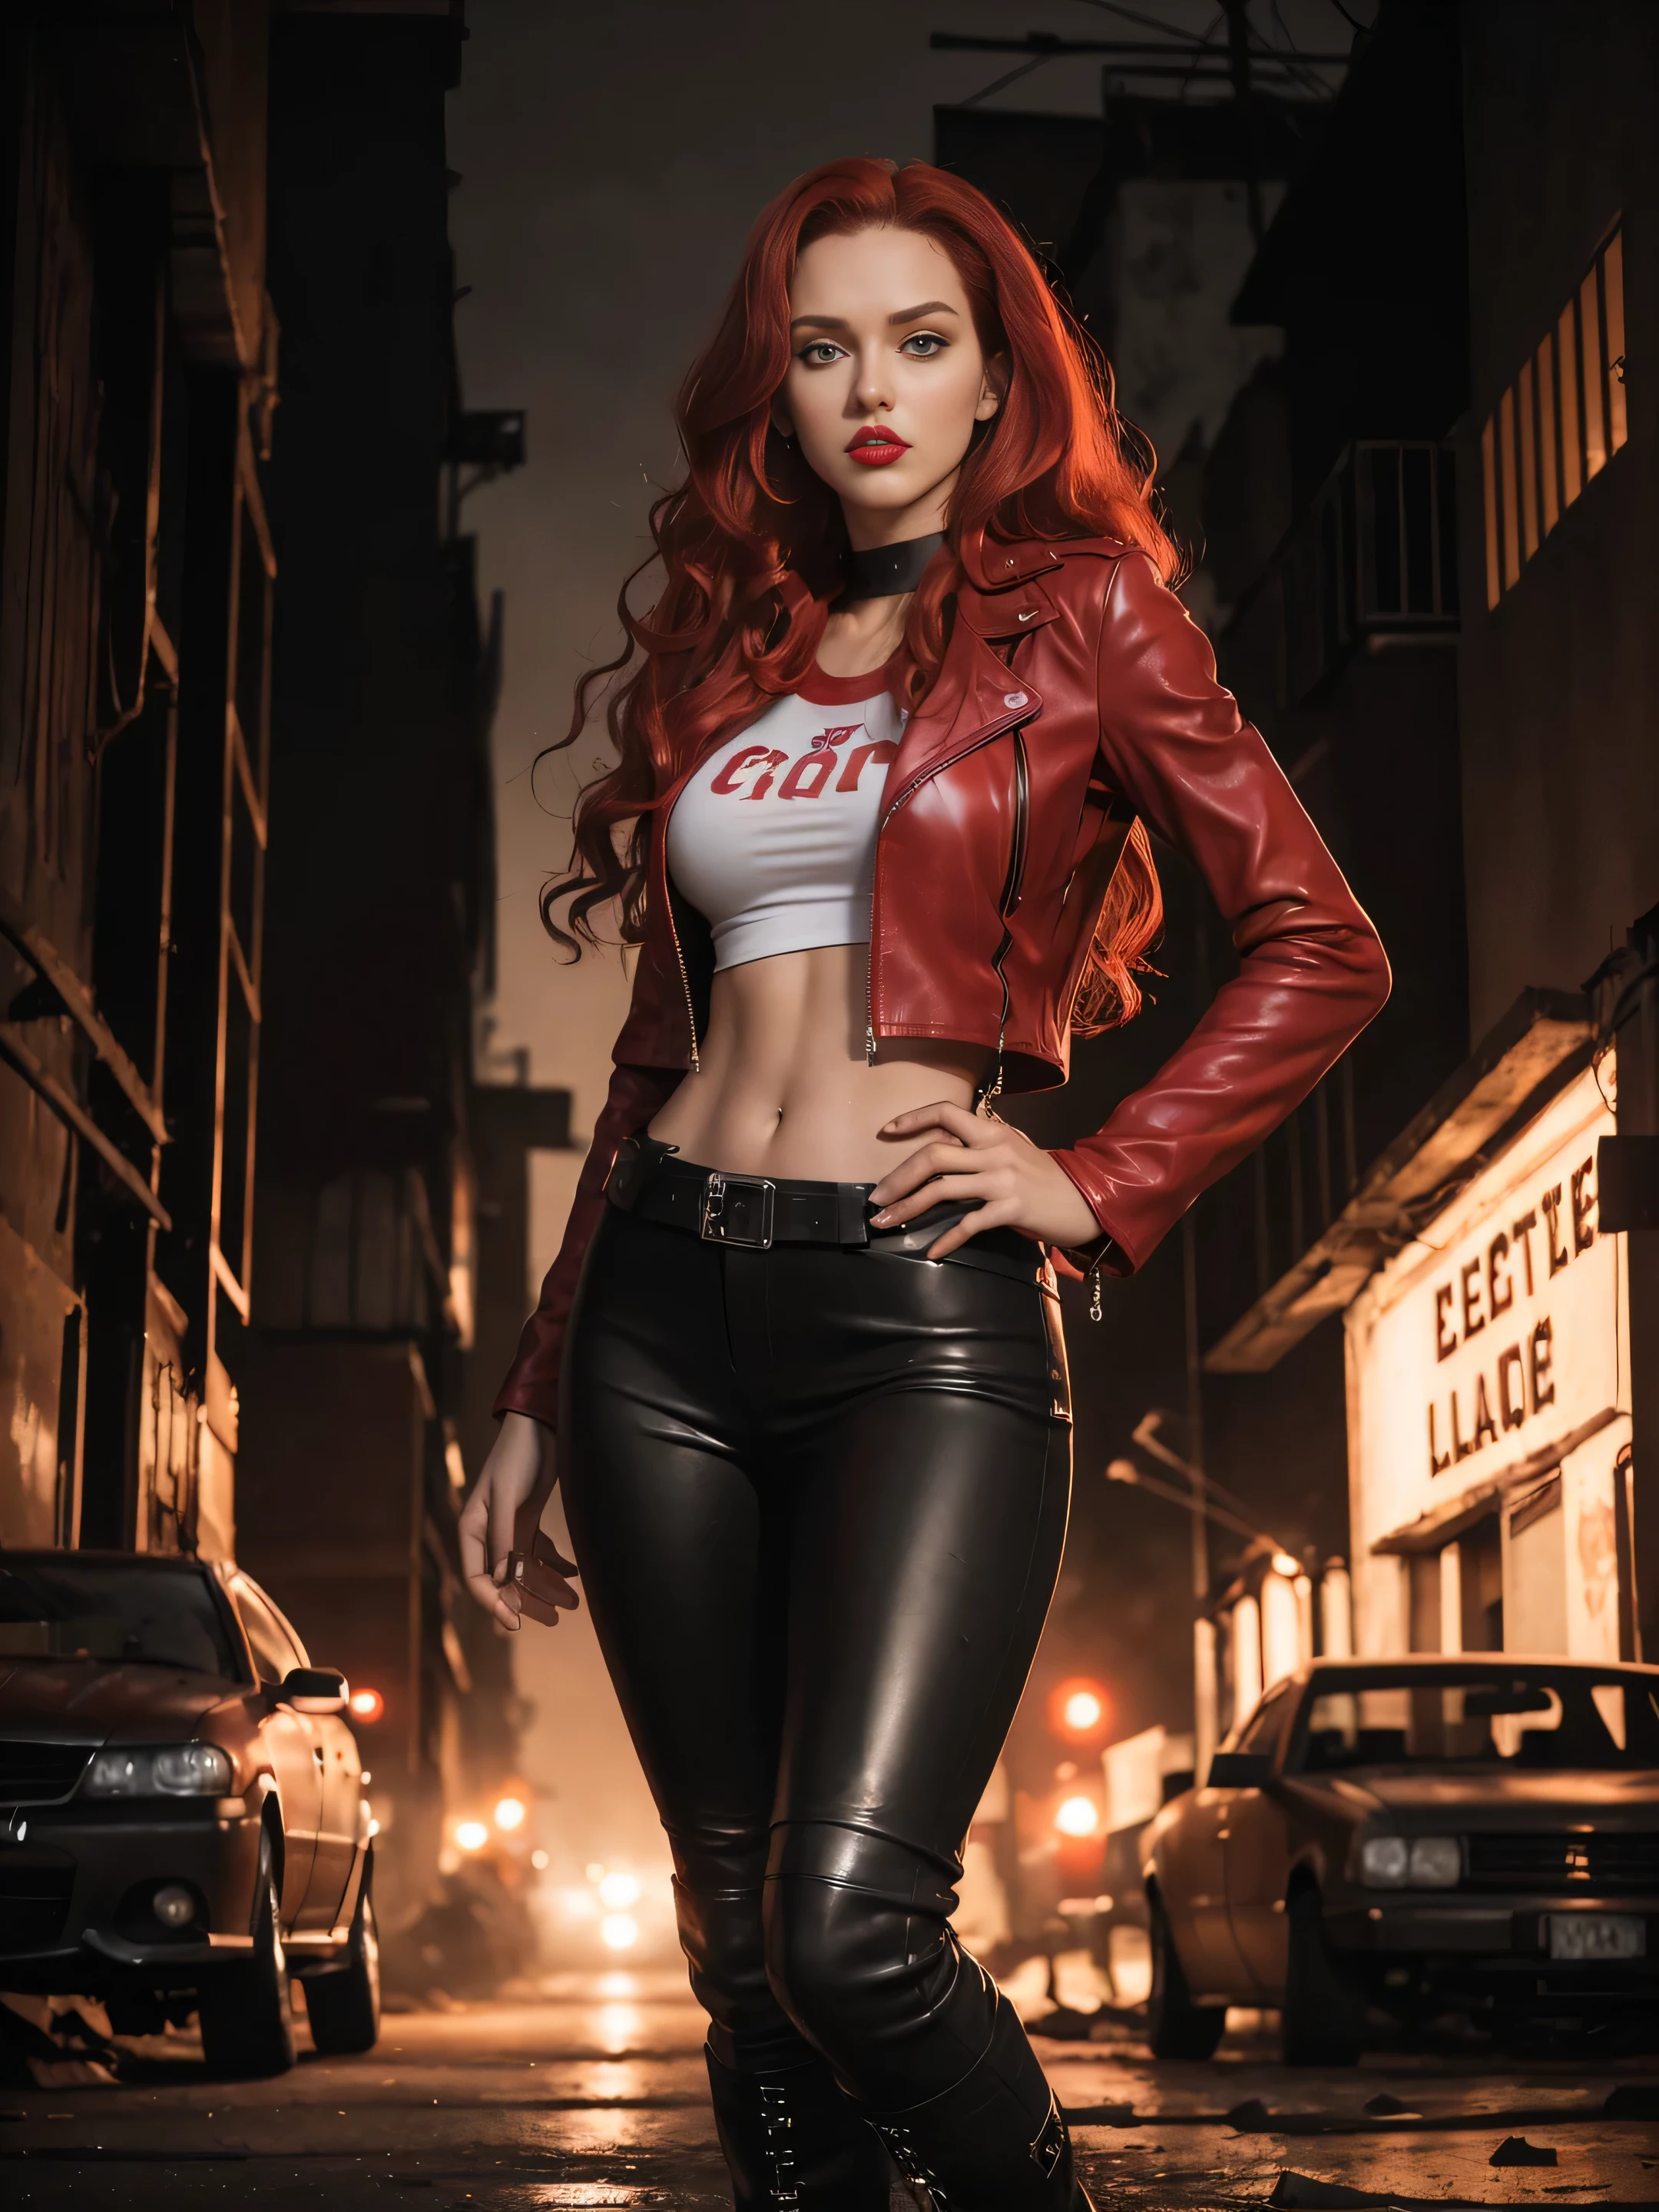 full length young beauty sexy 18 year old Instagram model girl, long curly red hair, green eyes, red lips, scowling expression, piercing gaze, wearing tight leather pants, tight leather jacket, in a red sleeveless t-shirt, leather boots, standing in a deserted post-apocalyptic small town street at night in the fog, faded dark colors